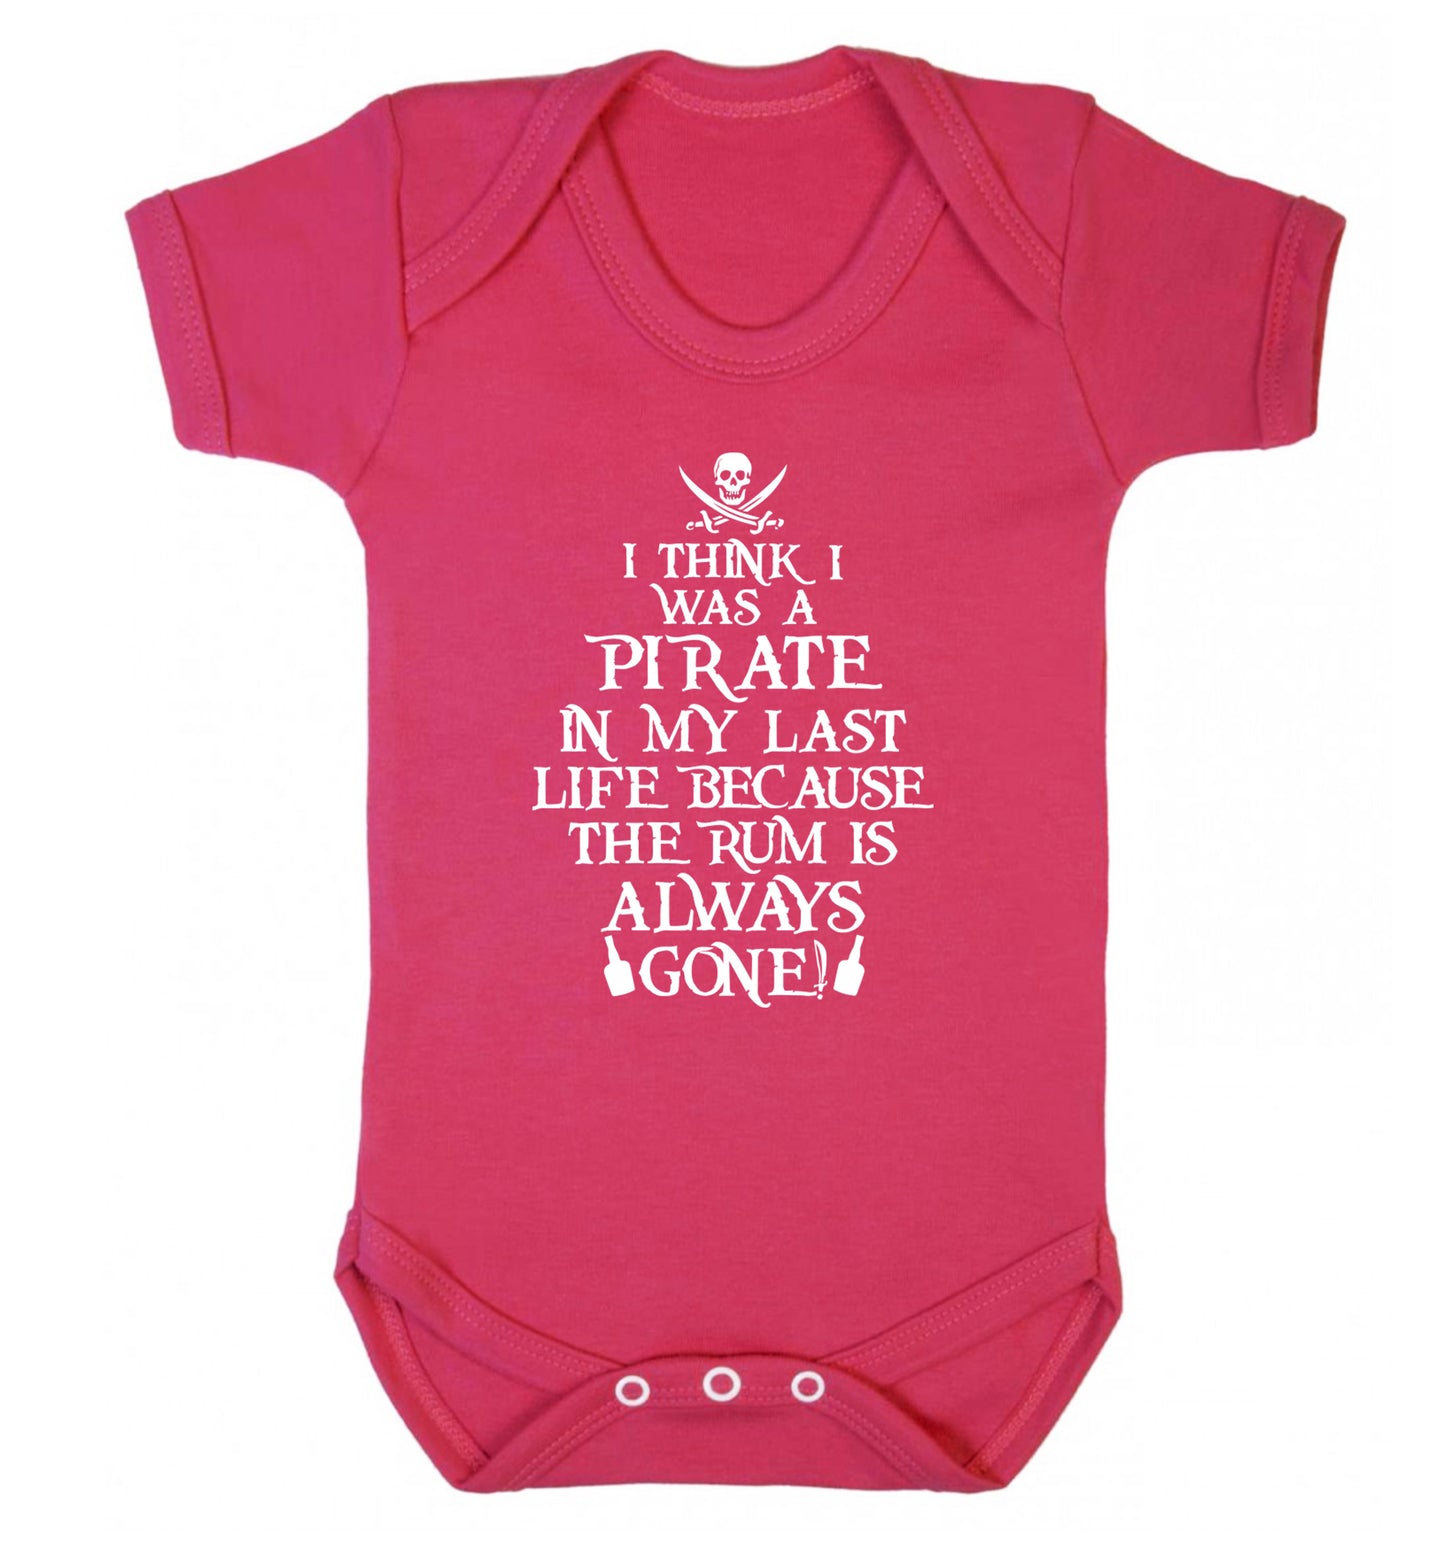 I think I was a pirate in my past life because the rum is always gone! Baby Vest dark pink 18-24 months